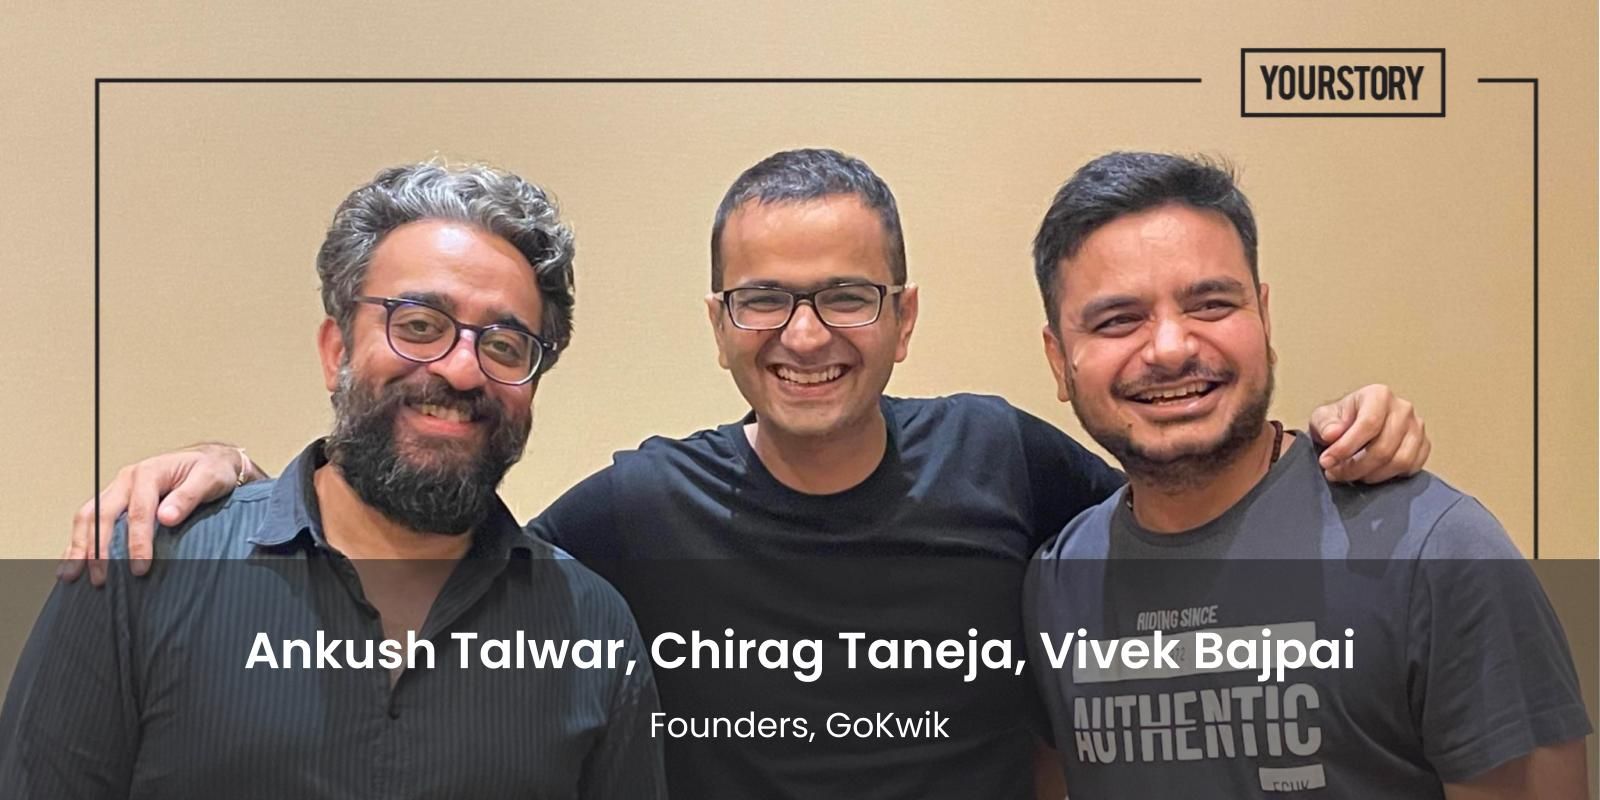 This startup is solving buying experience of customers on ecommerce platforms